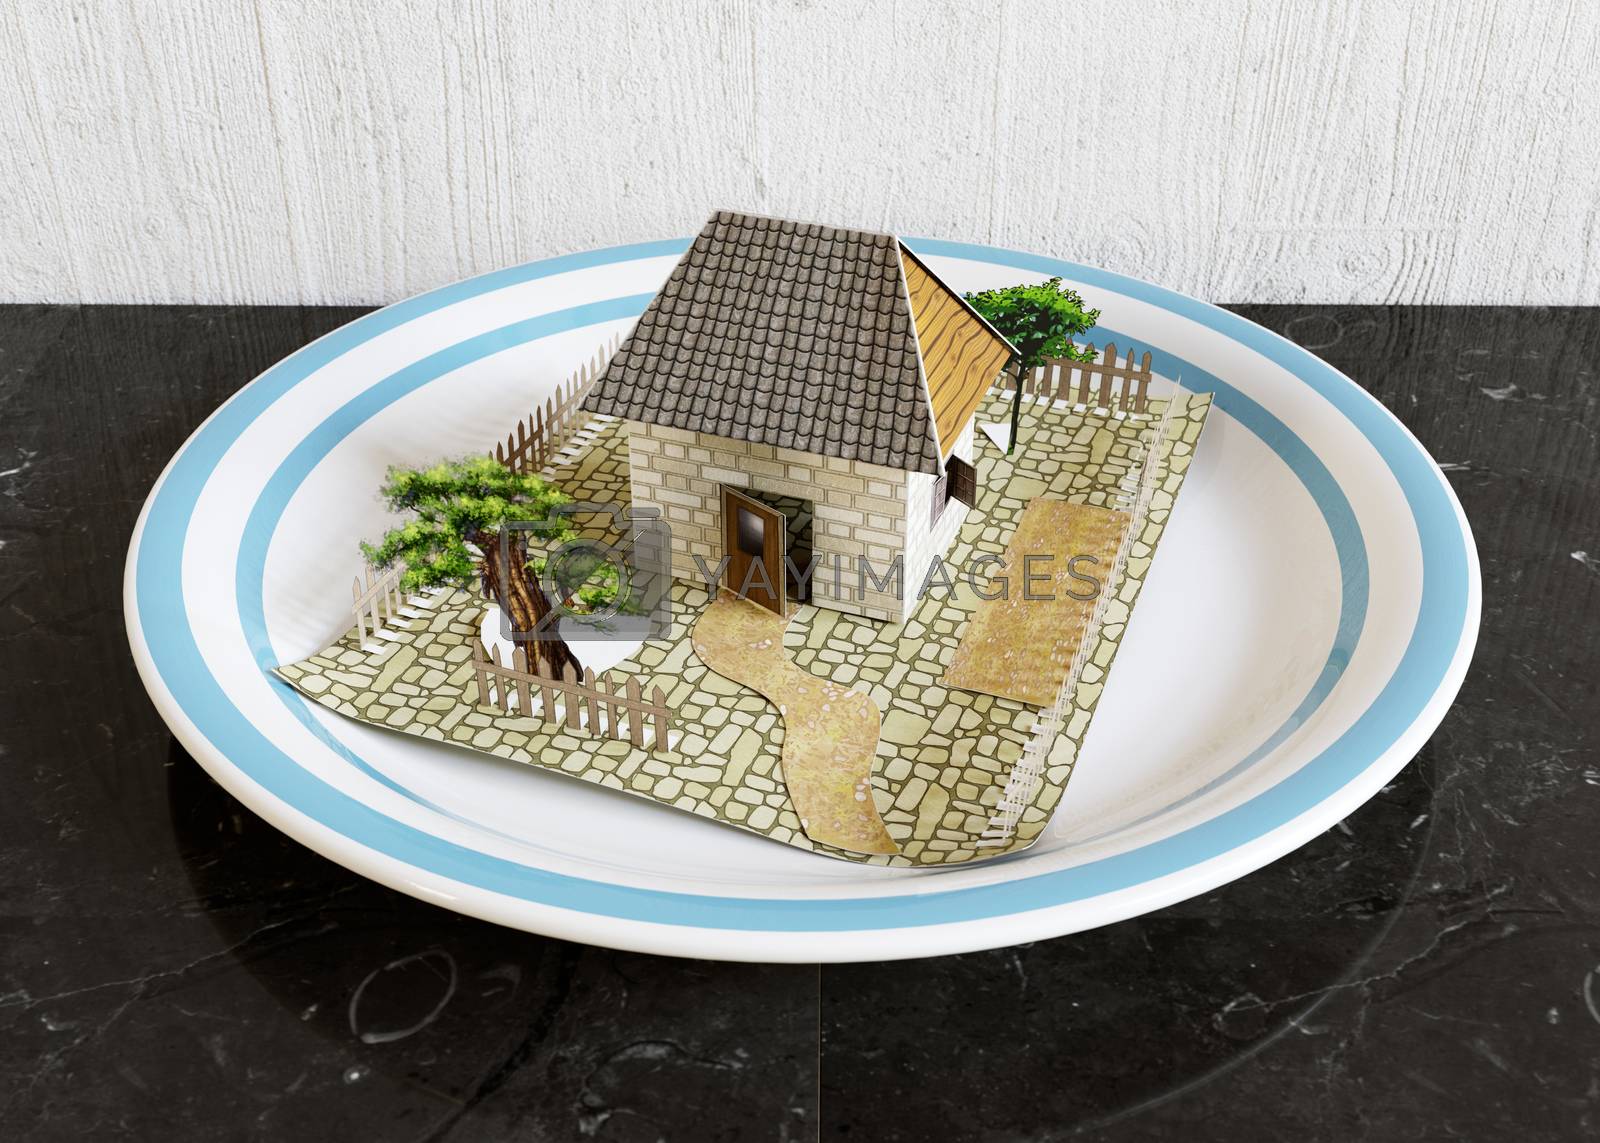 Royalty free image of isolate house on the plate with blue border real estate business concept photo by denisgo